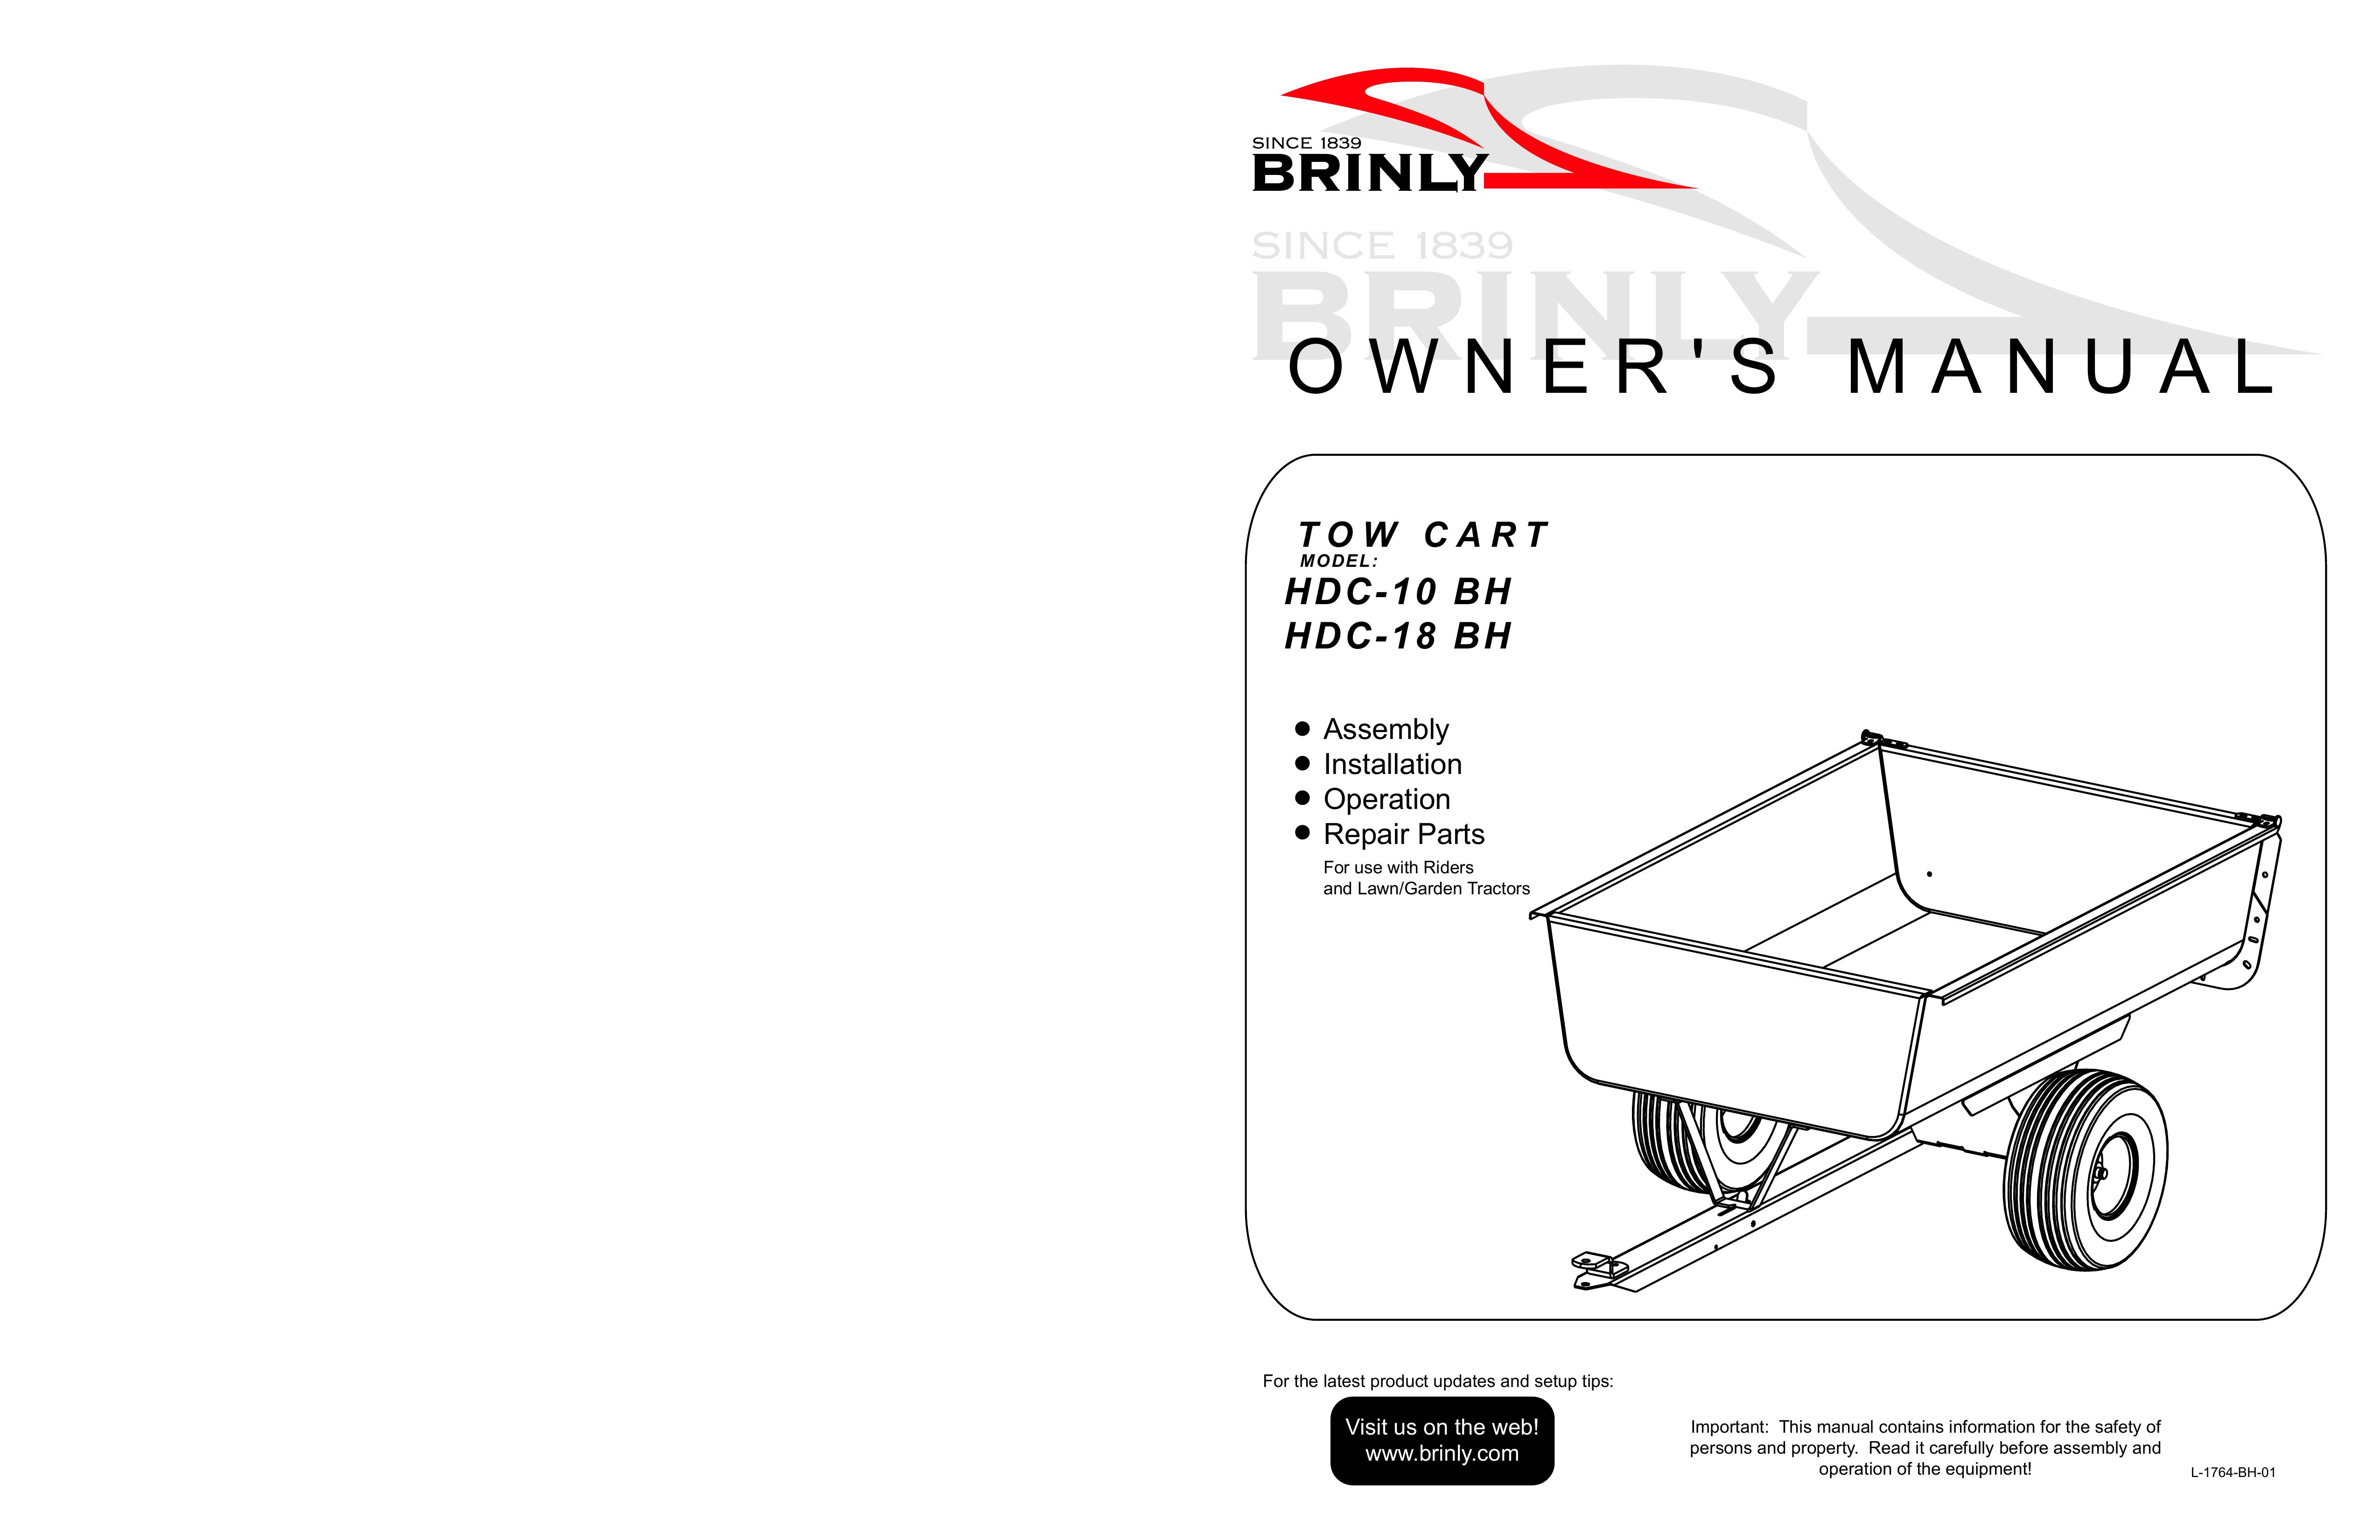 Brinly-Hardy HDC-10 Lawn Mower Accessory User Manual